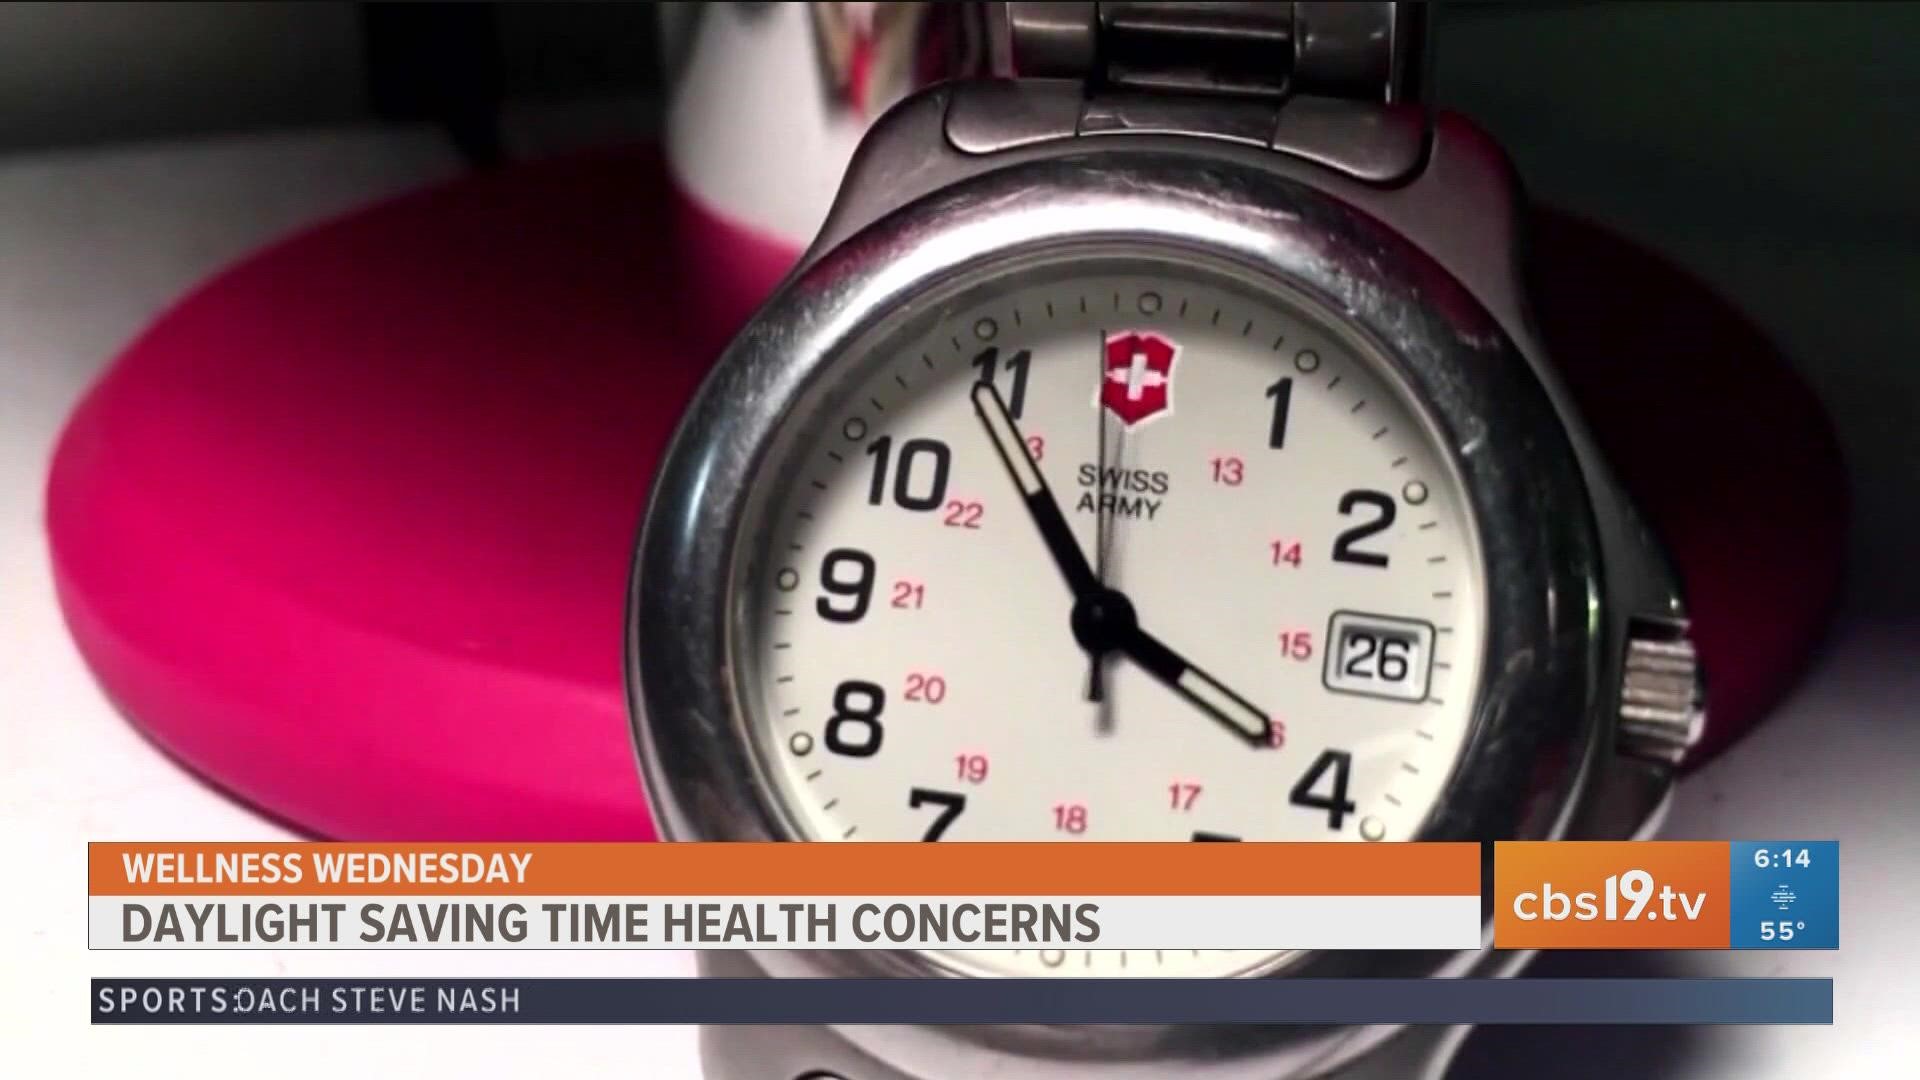 Even though we may get an extra hour of sleep, doctors say the change of time can come with health concerns